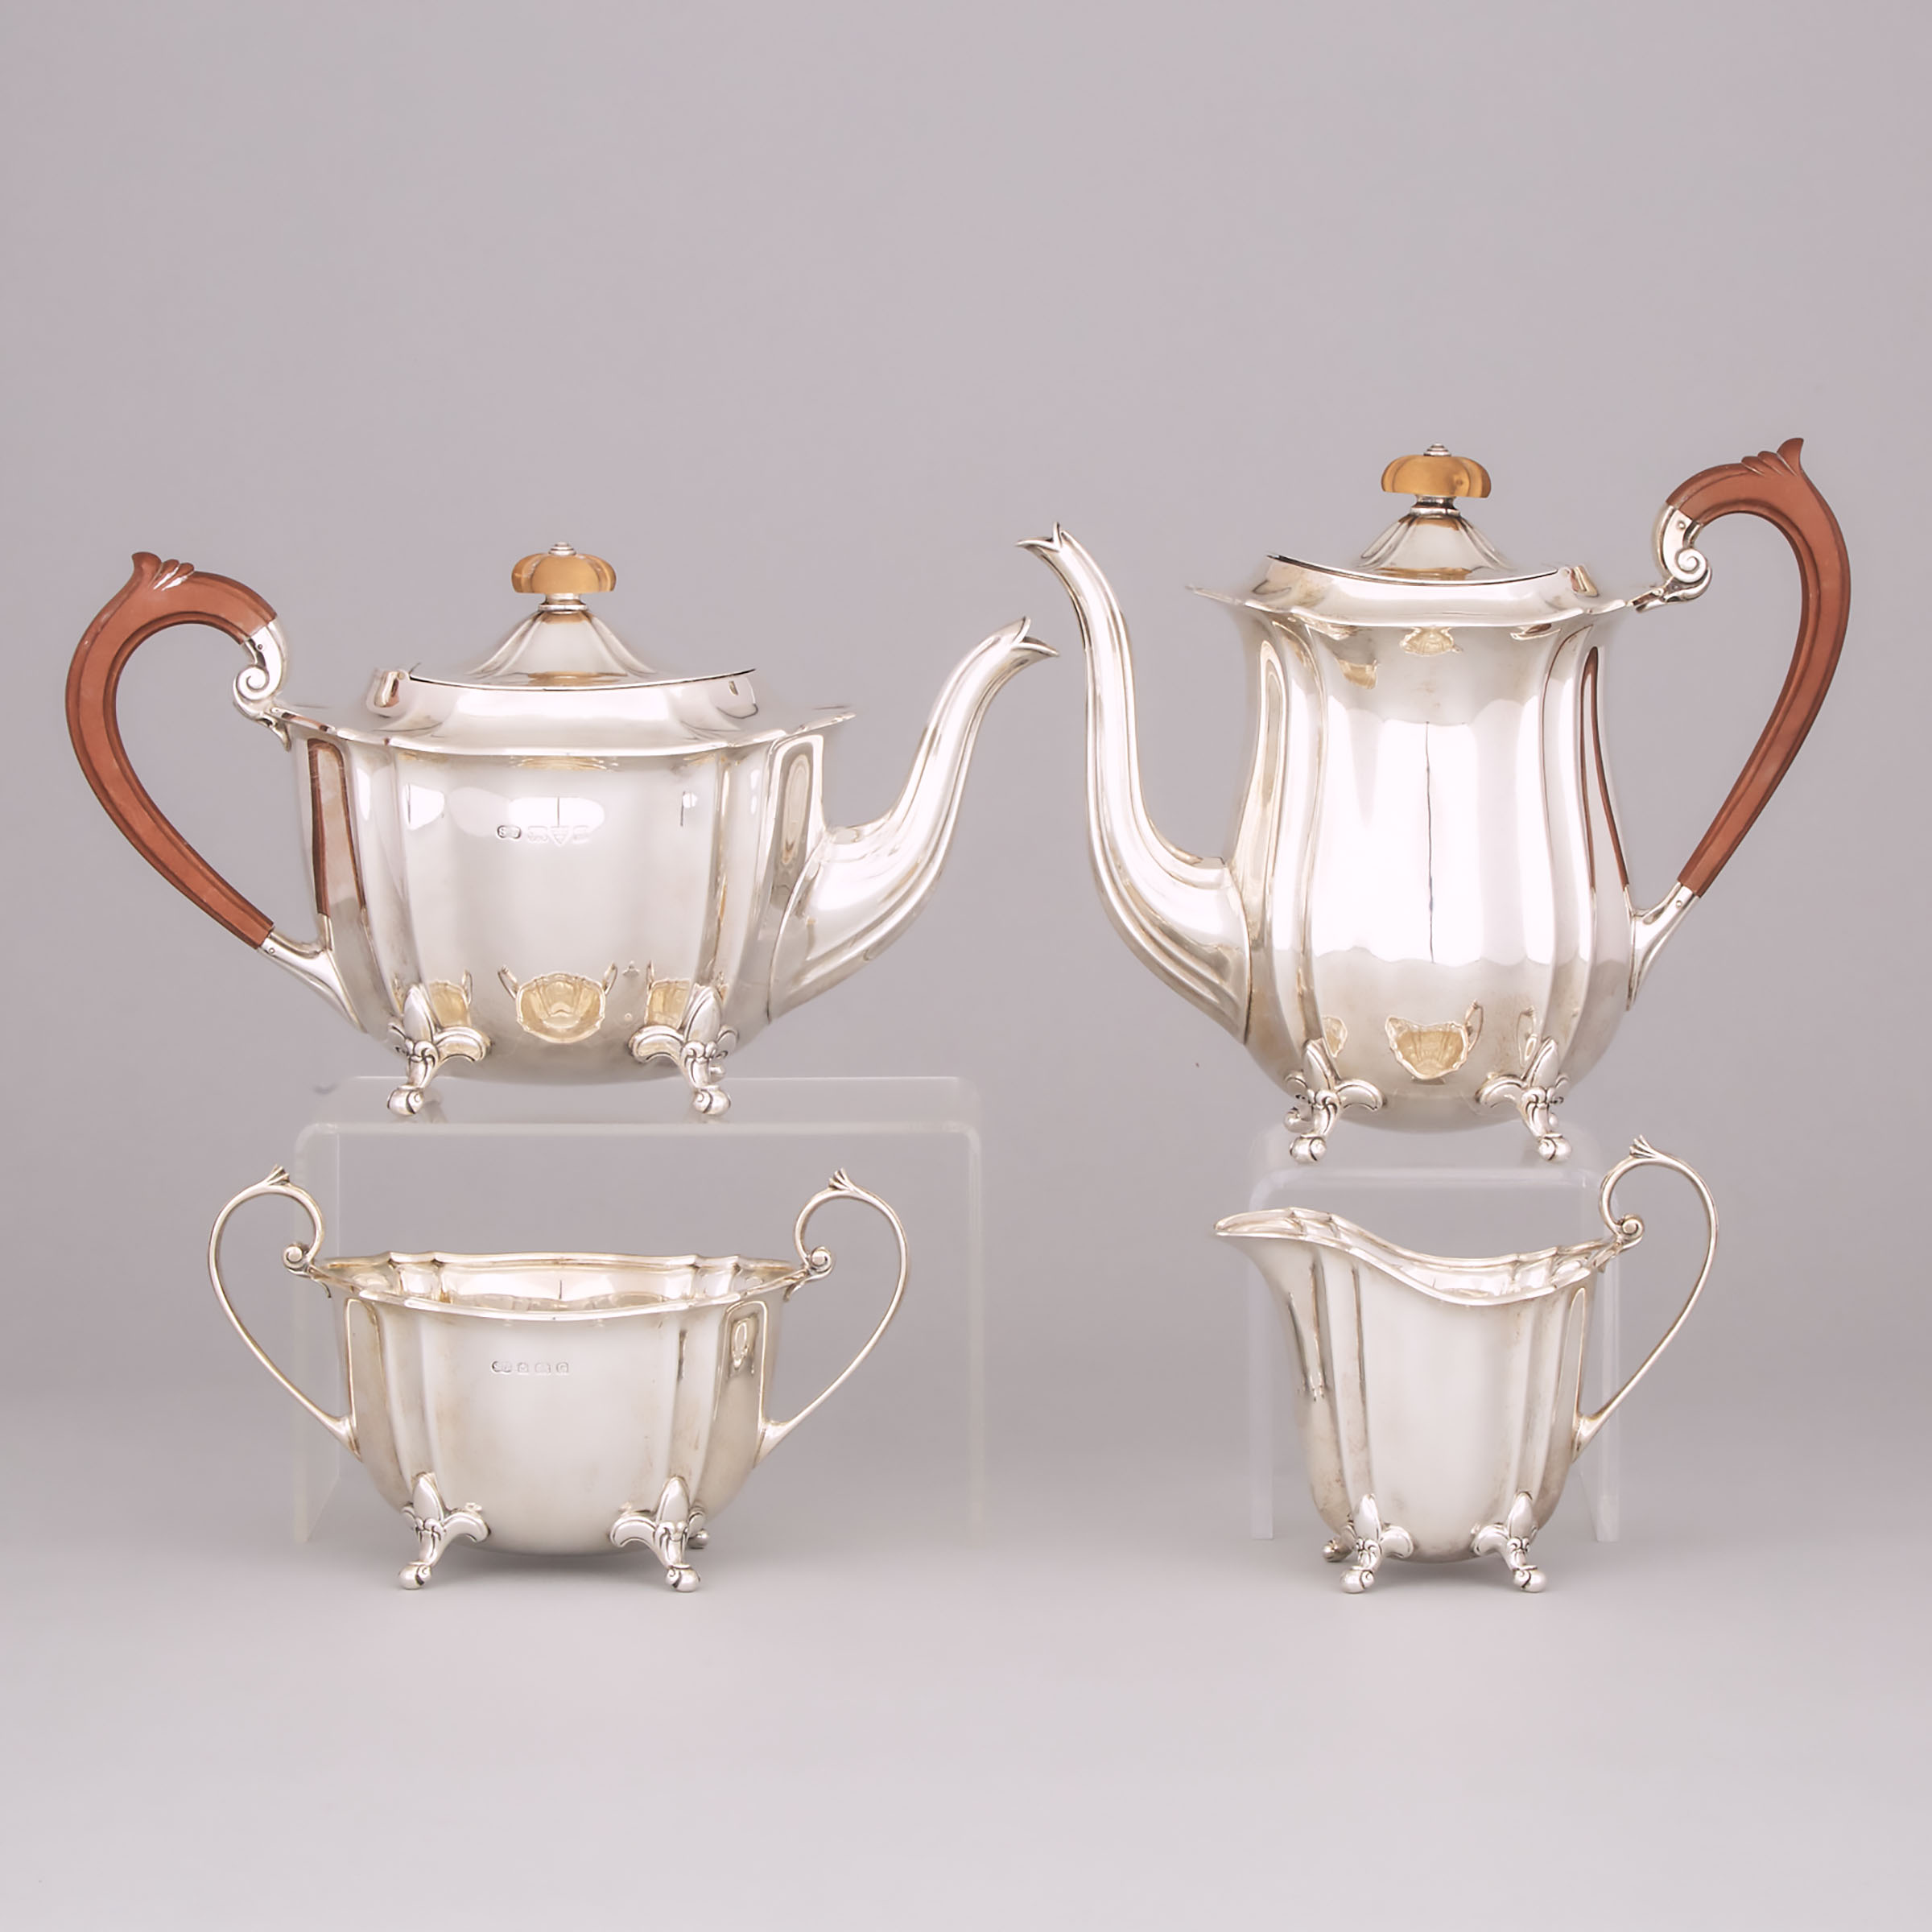 English Silver Tea and Coffee Service, Suckling Ltd., Birmingham and Chester, 1931